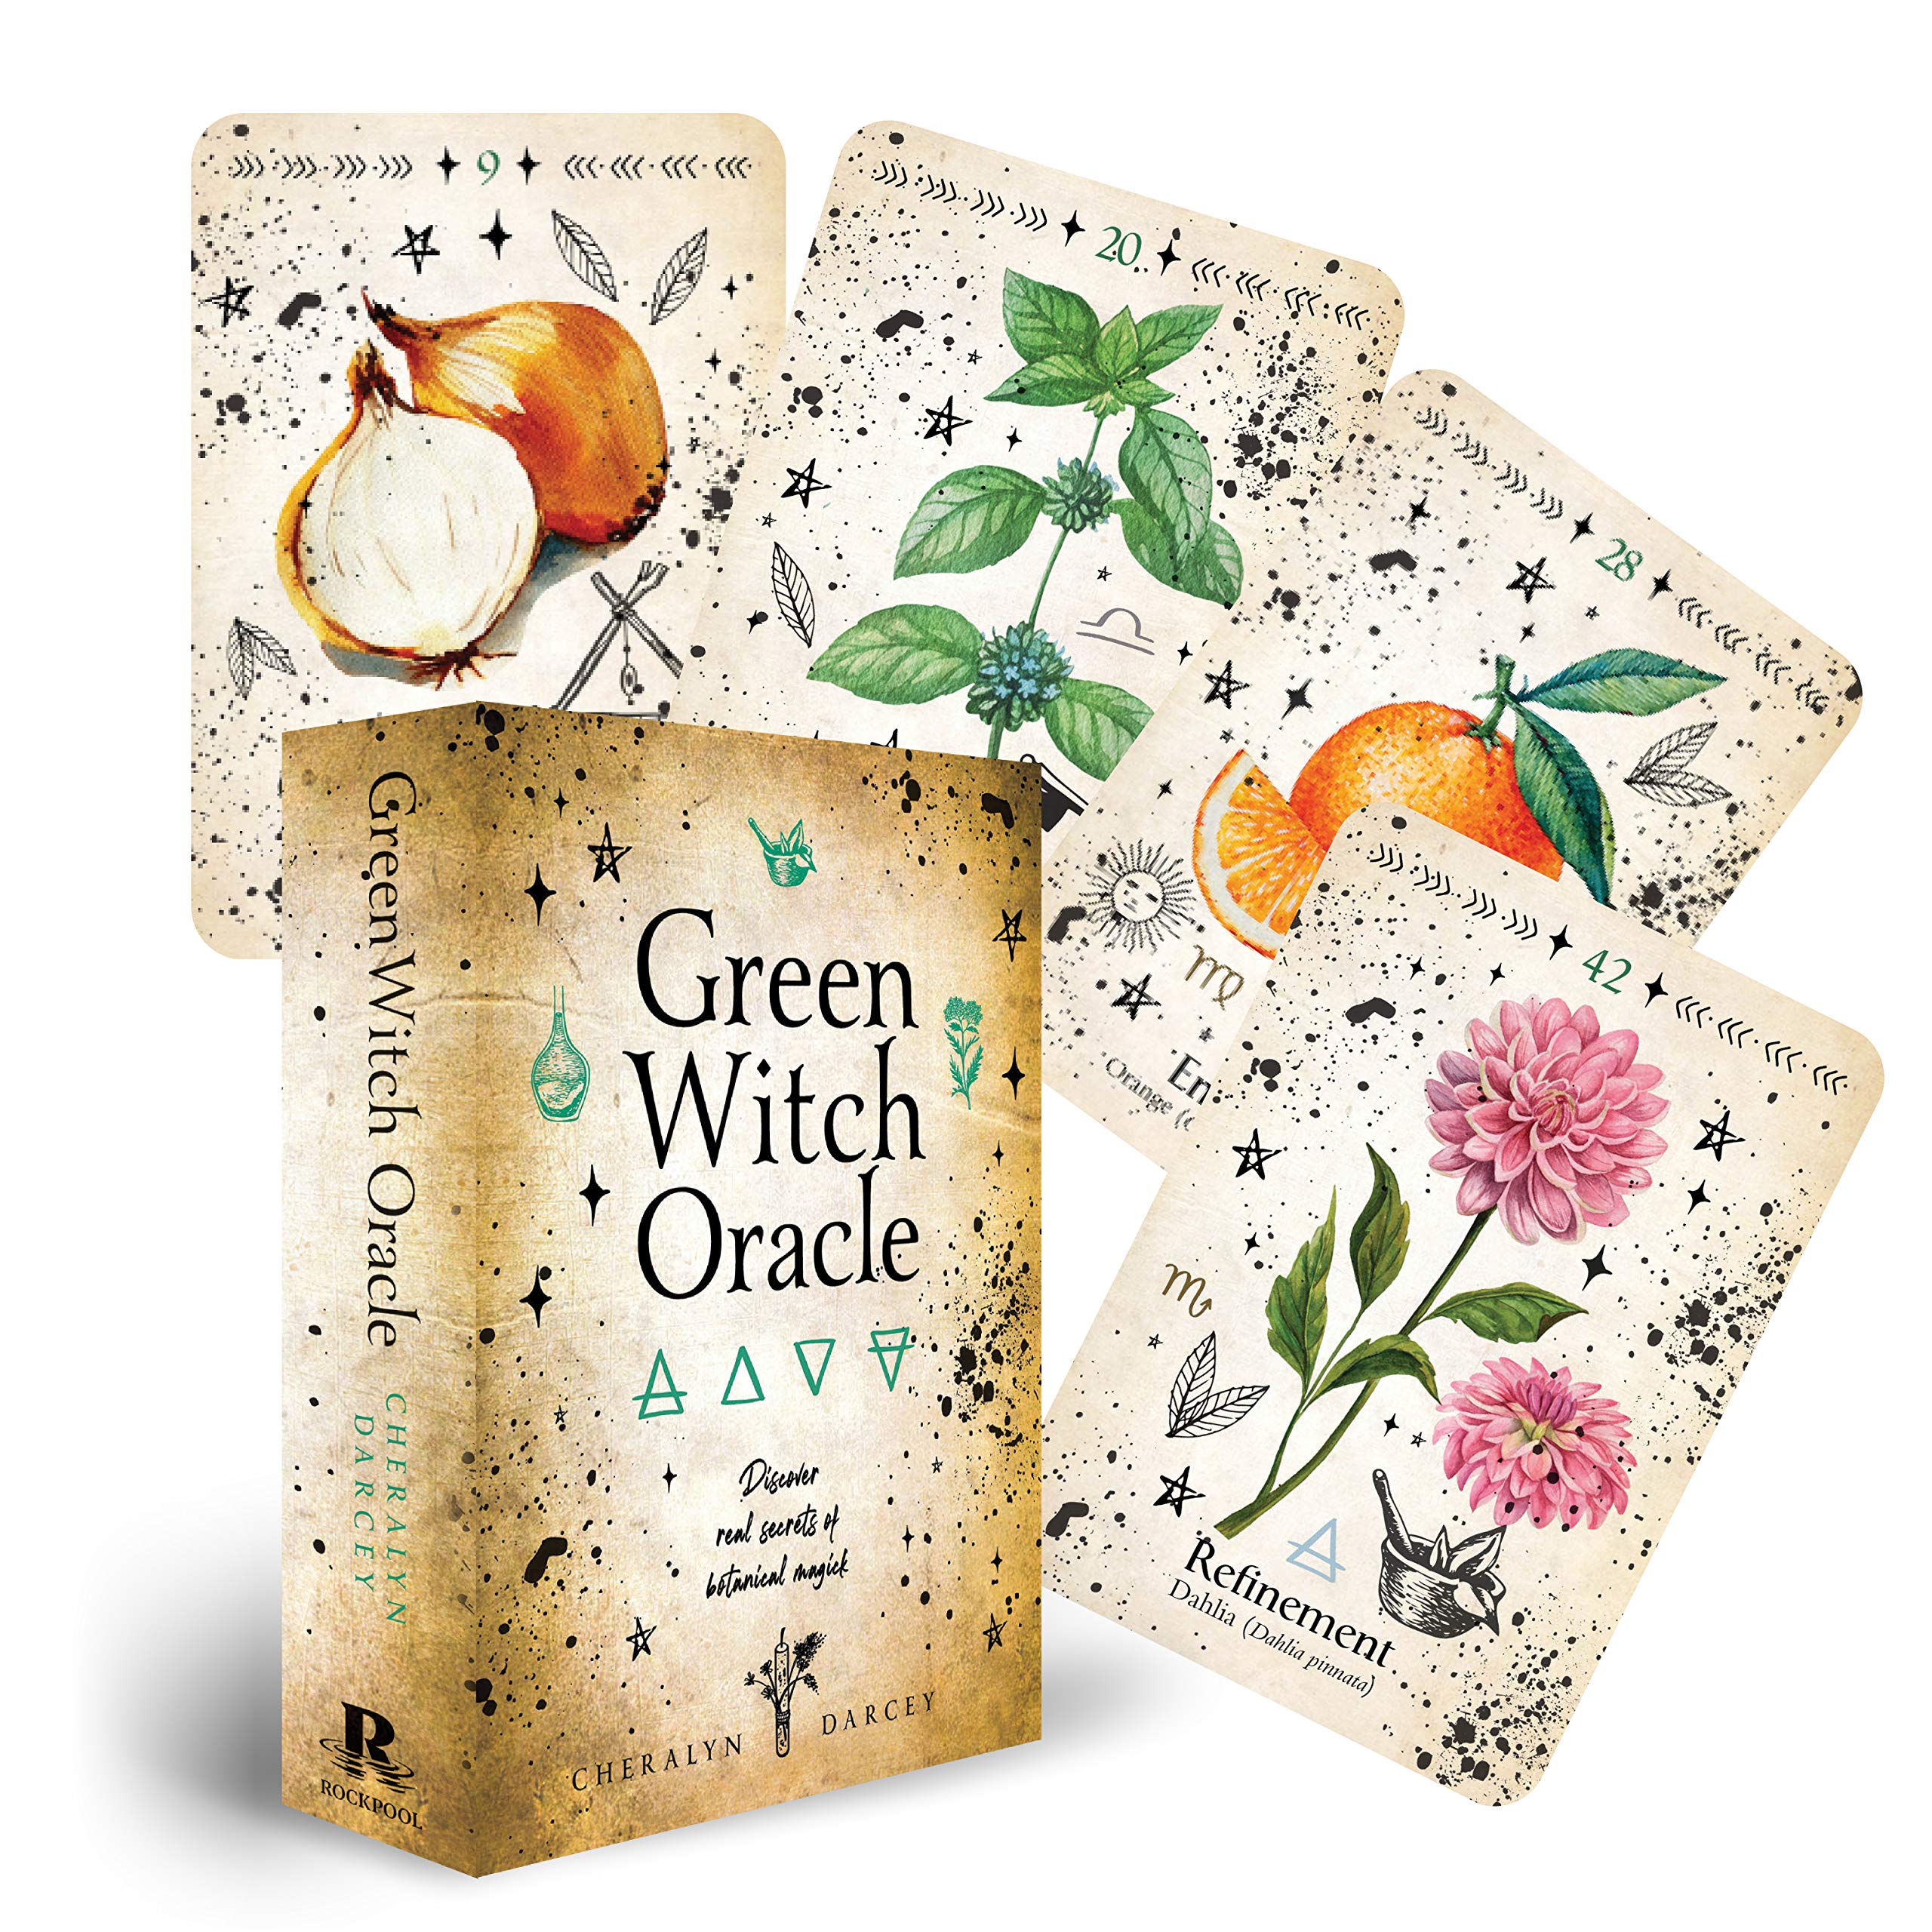 Green Witch Oracle Cards: Discover Real Secrets of Natural Magick by Cheralyn Darcey from